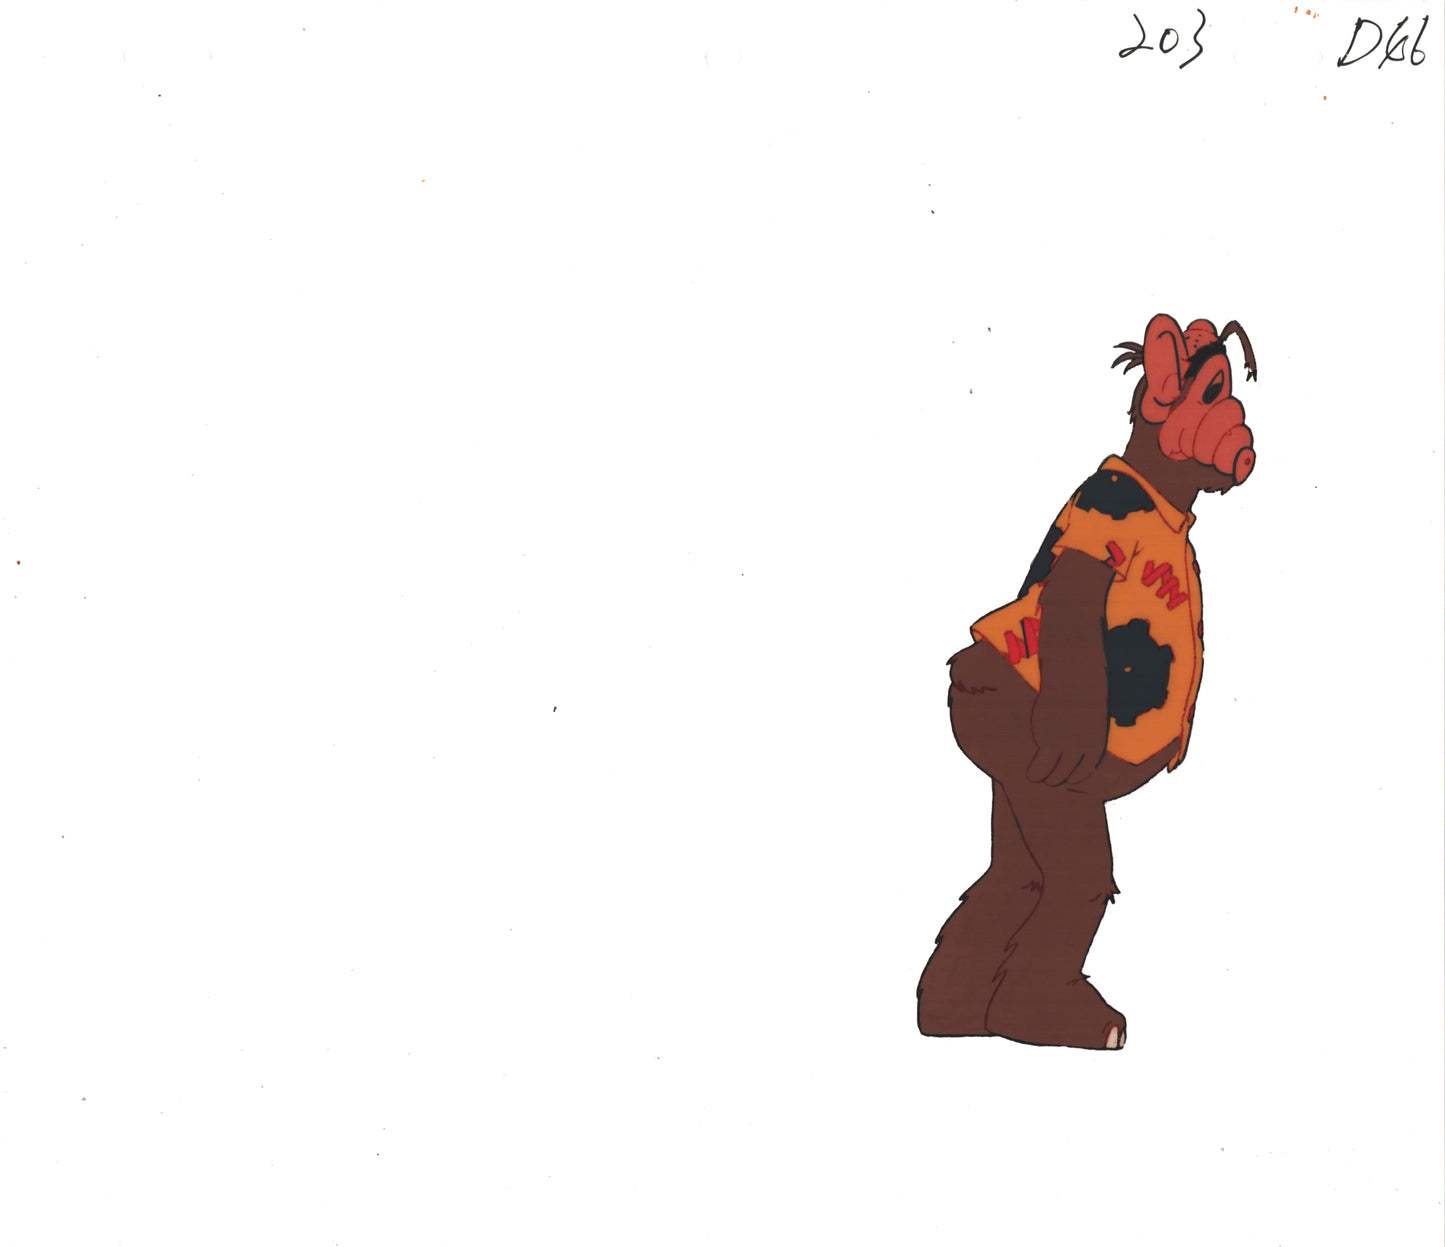 ALF The Animated Series Production Animation Cel and Drawing DIC Melmac B-d6